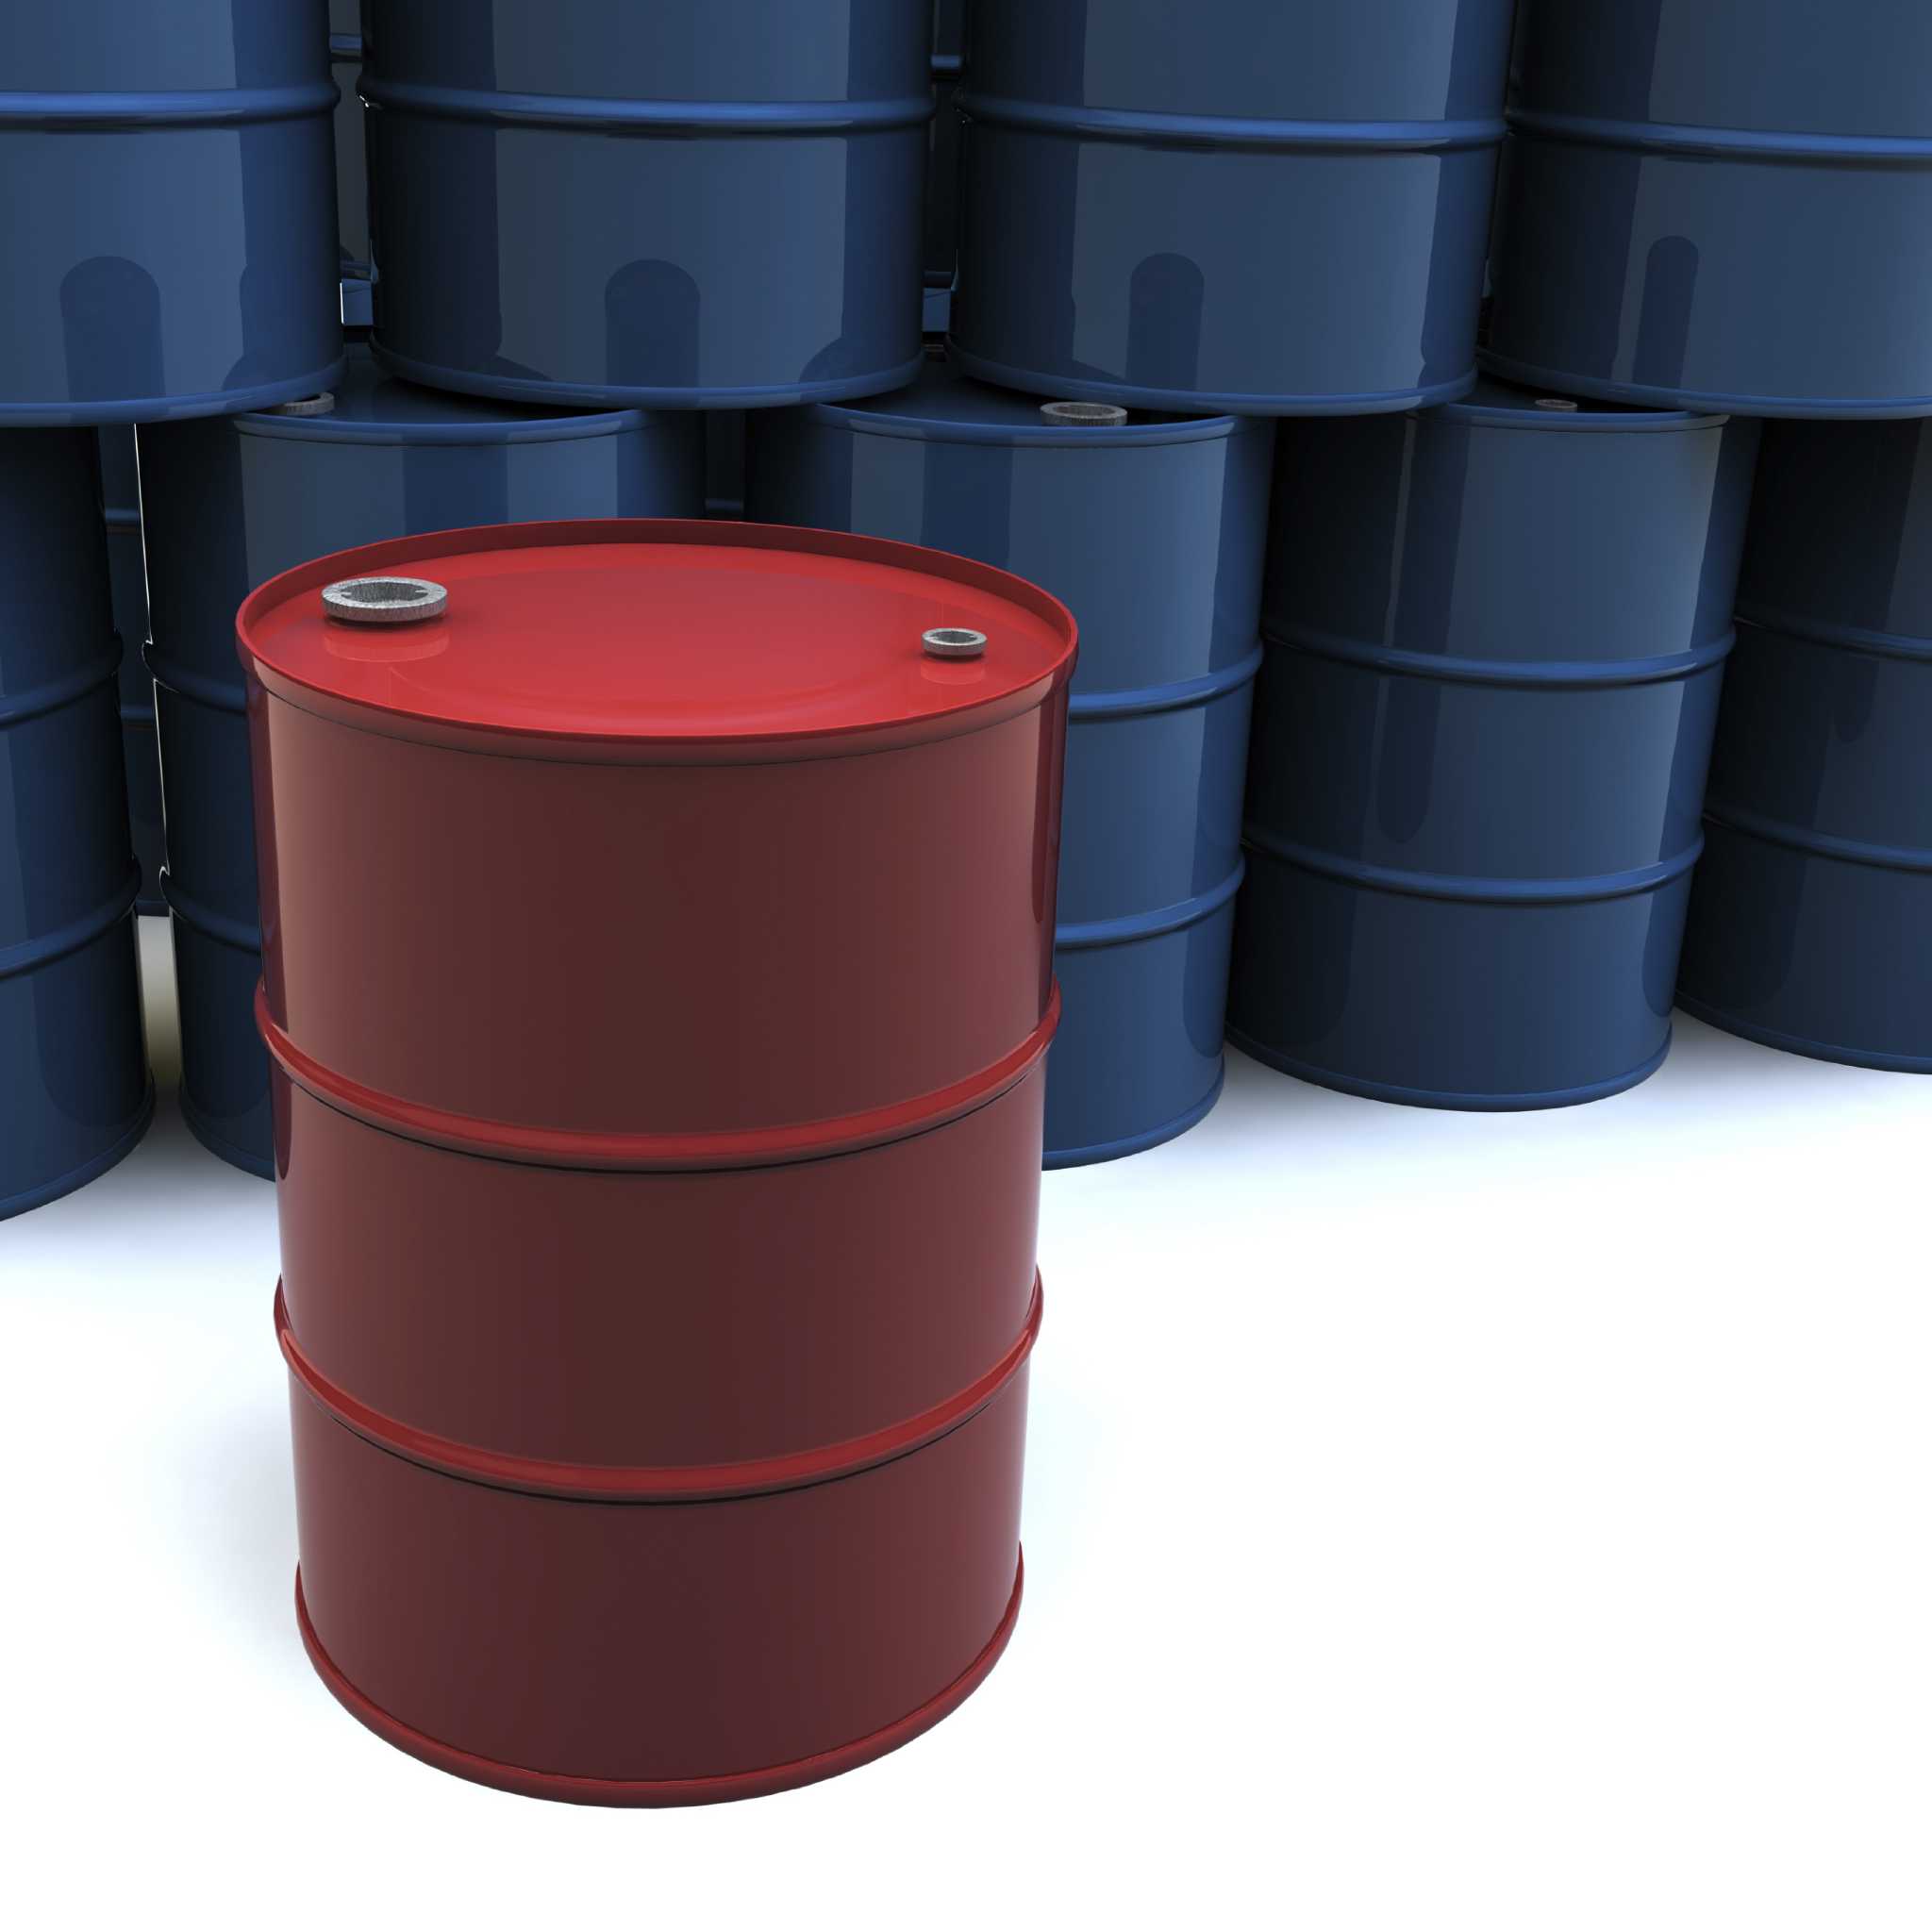 A stack of blue oil barrels with one red barrel. 3D rendering with raytraced textures and HDRI lighting. Attached file by mark evans -- purchased from istockphoto.com OIL DRUM BARREL